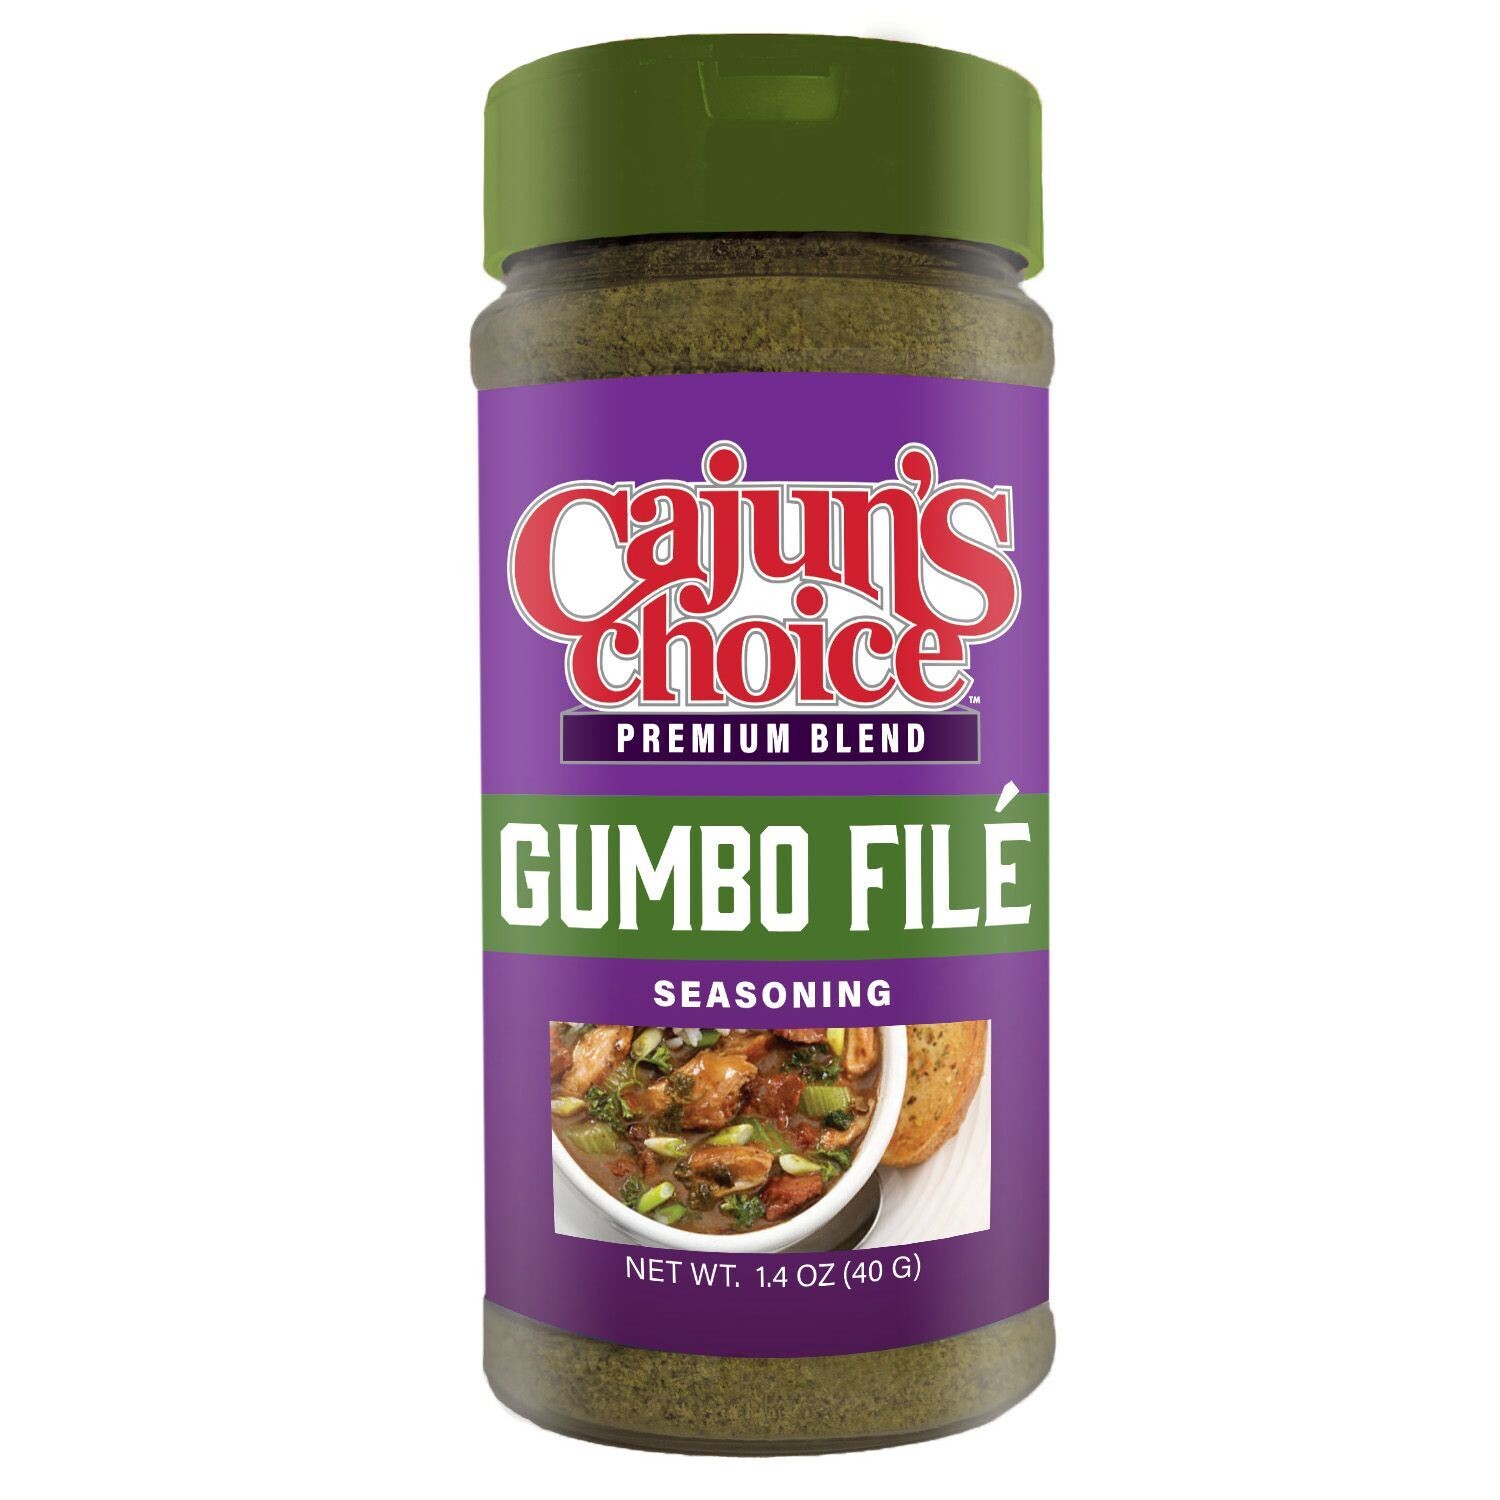 Make Your Own File Powder for Gumbo